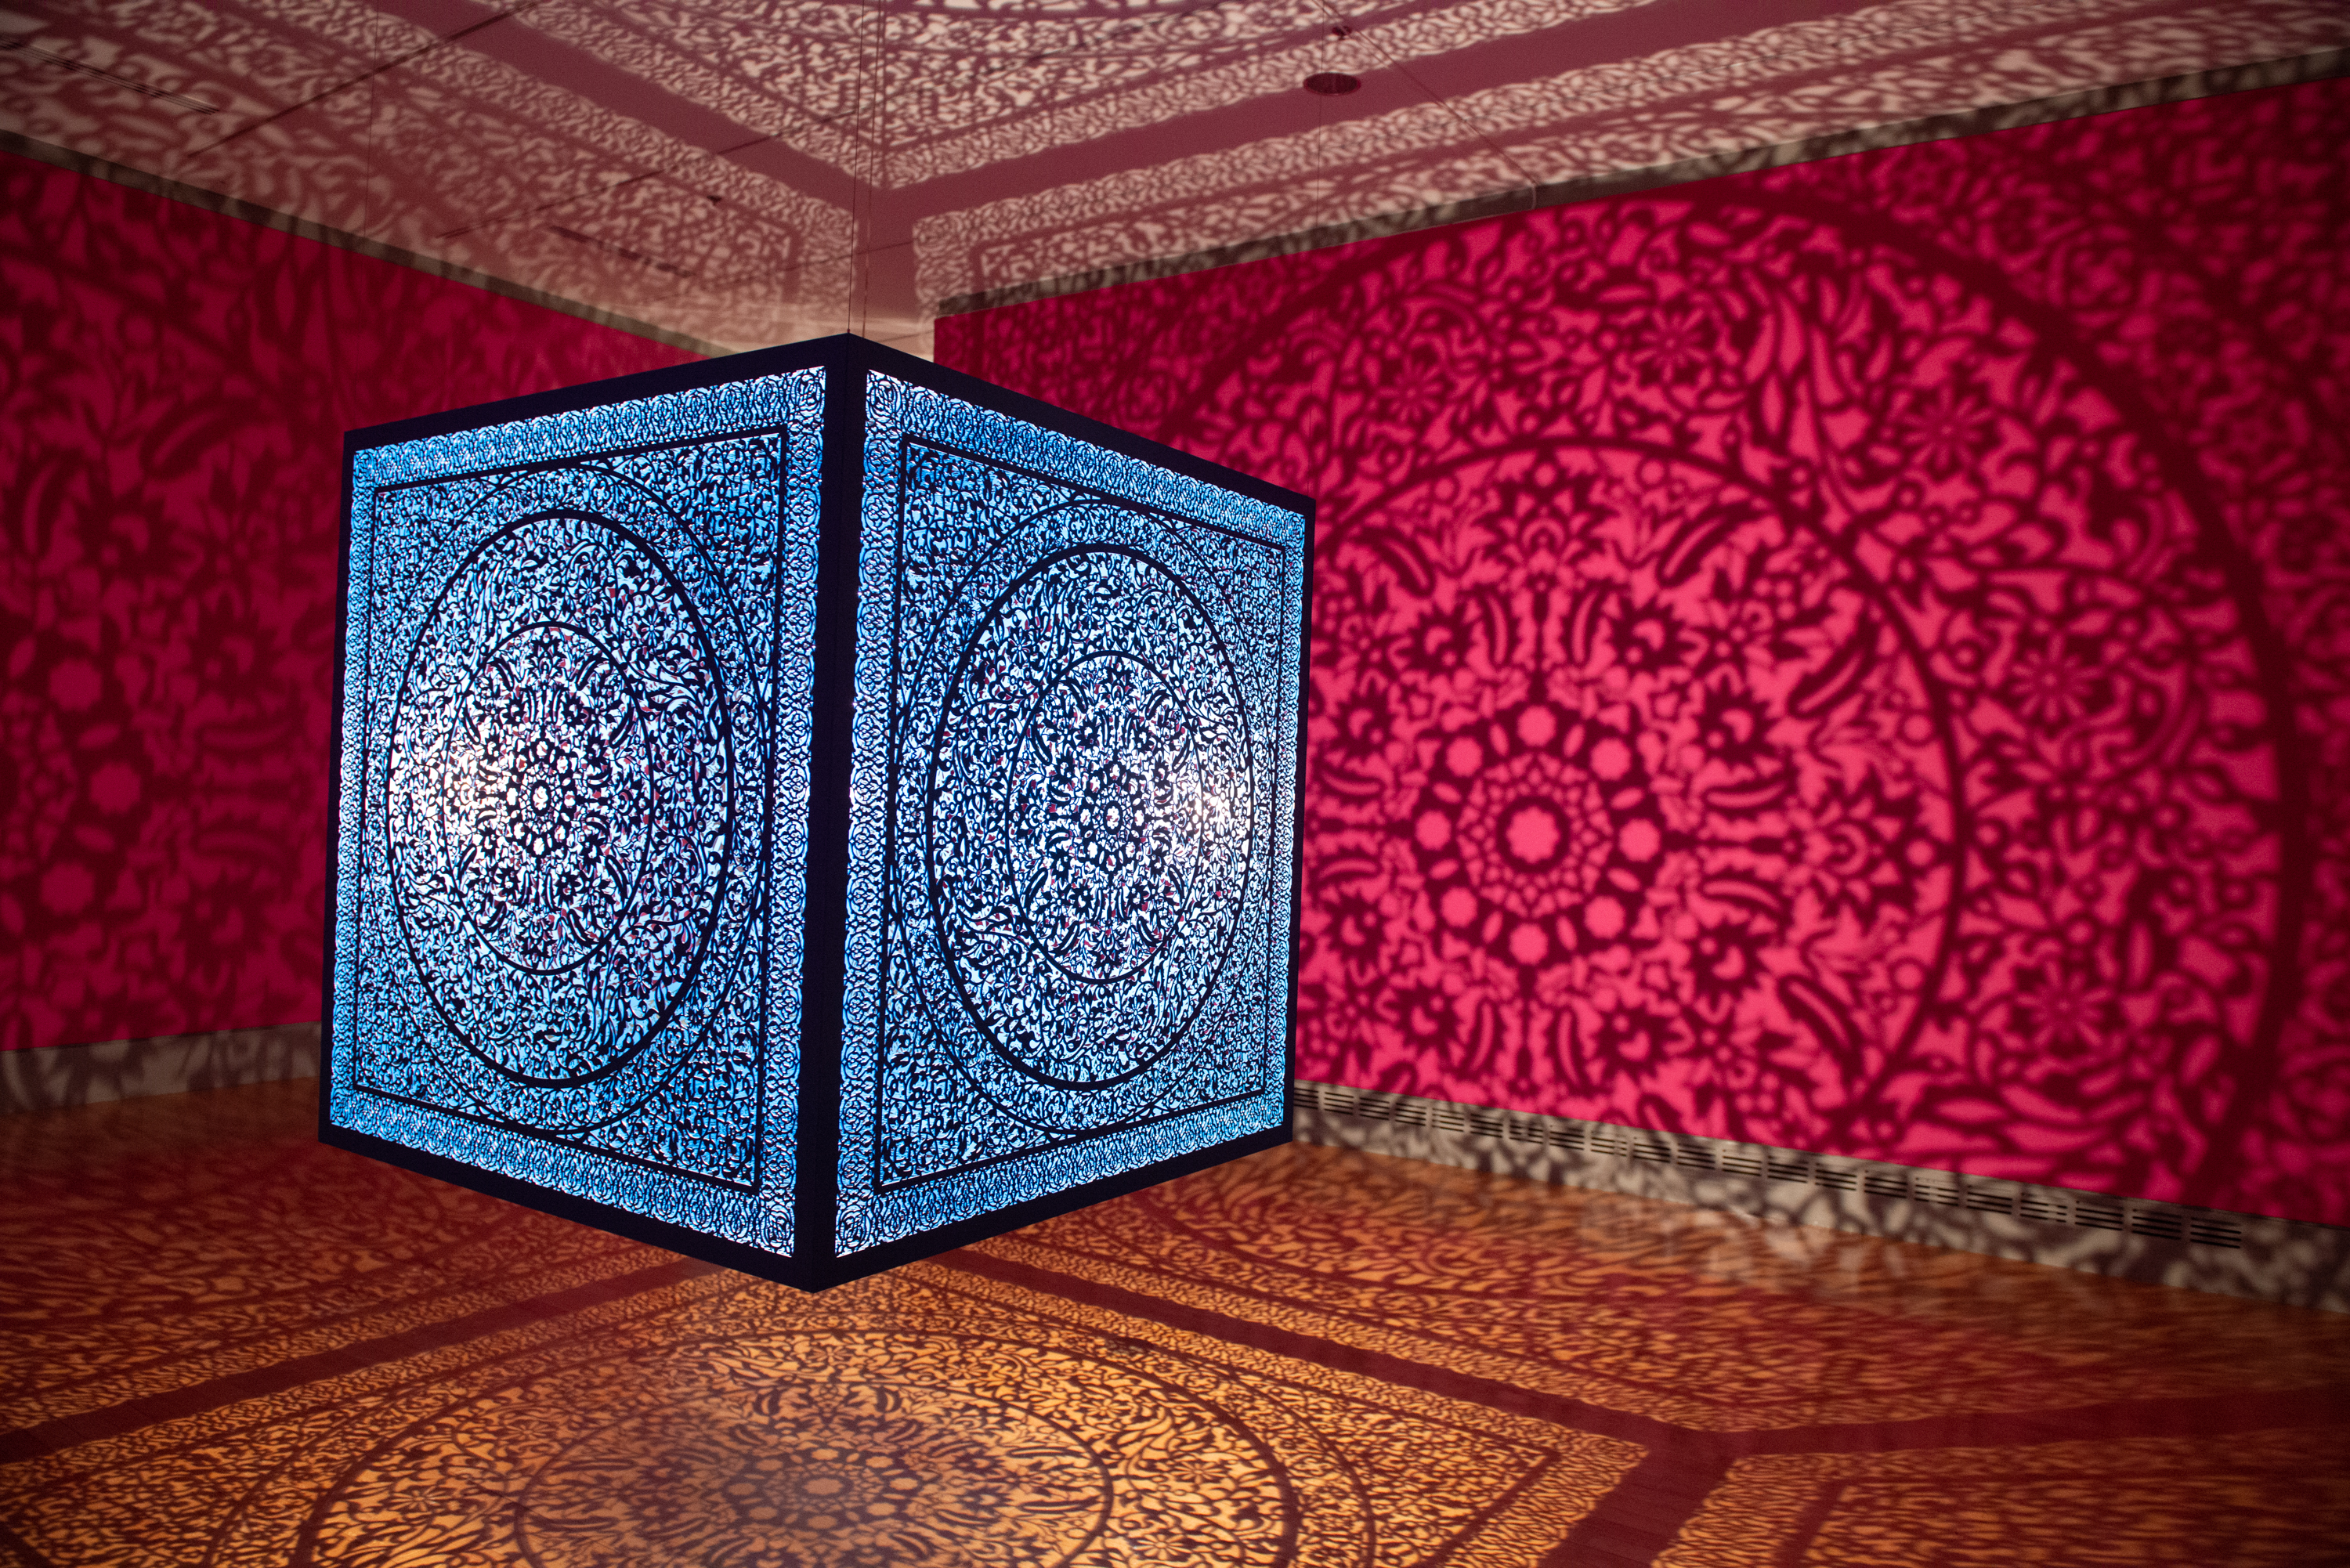 Agha Cube at Columbia Museum Of Art